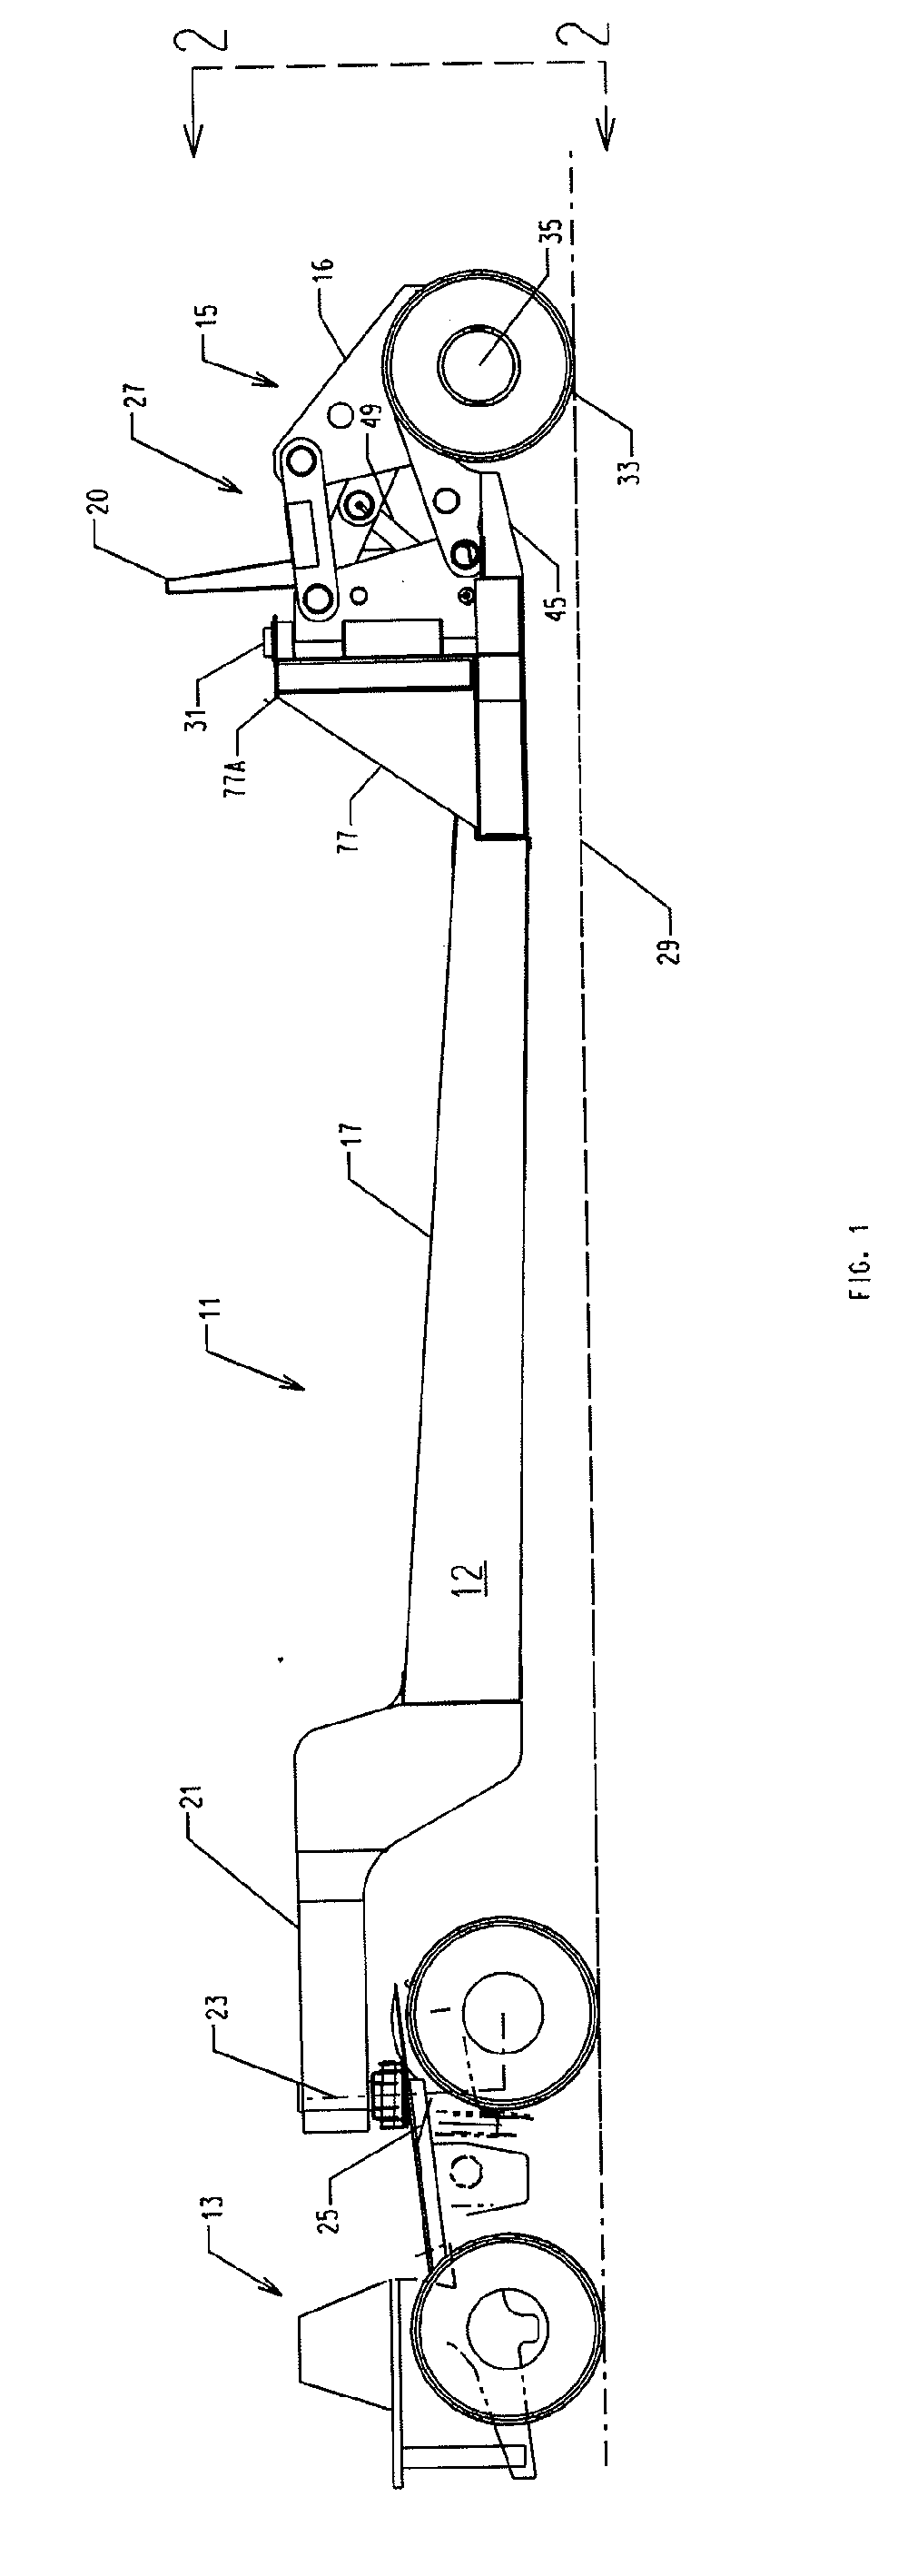 Method and apparatus for transitioning a heavy equipment hauling rear loading trailer between transport and loading positions